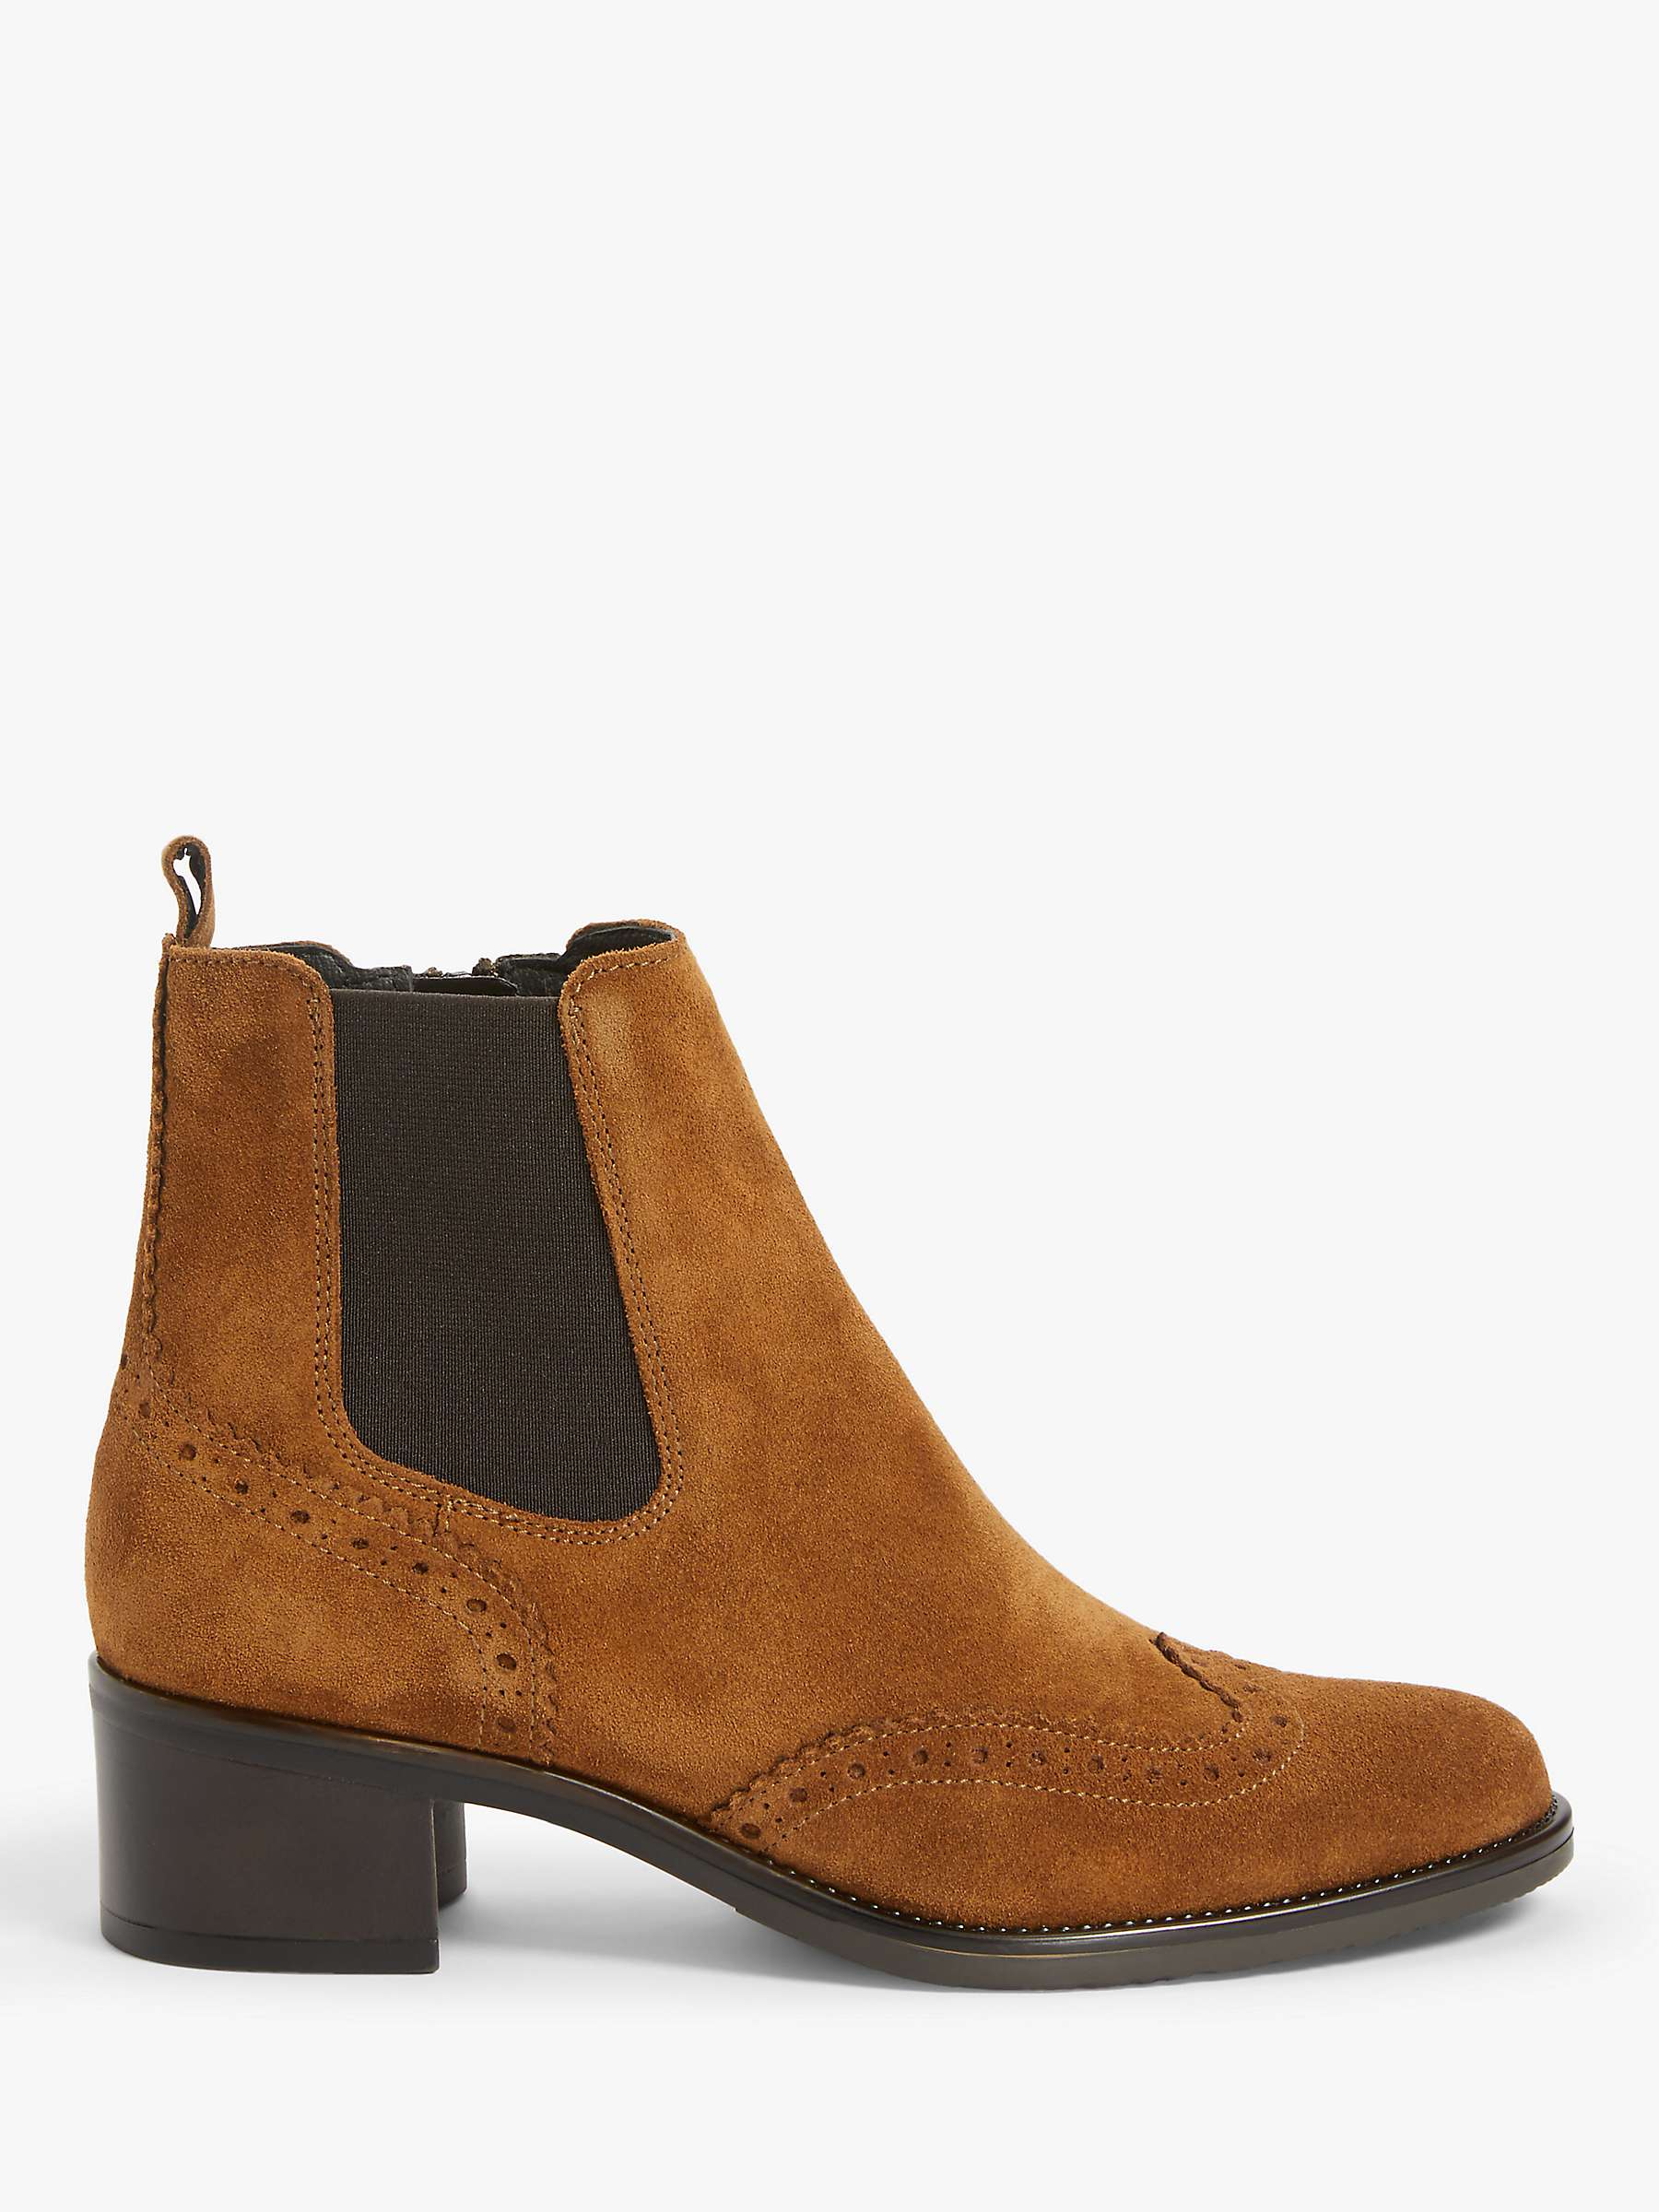 Buy John Lewis Odie Leather Ankle Boots Online at johnlewis.com